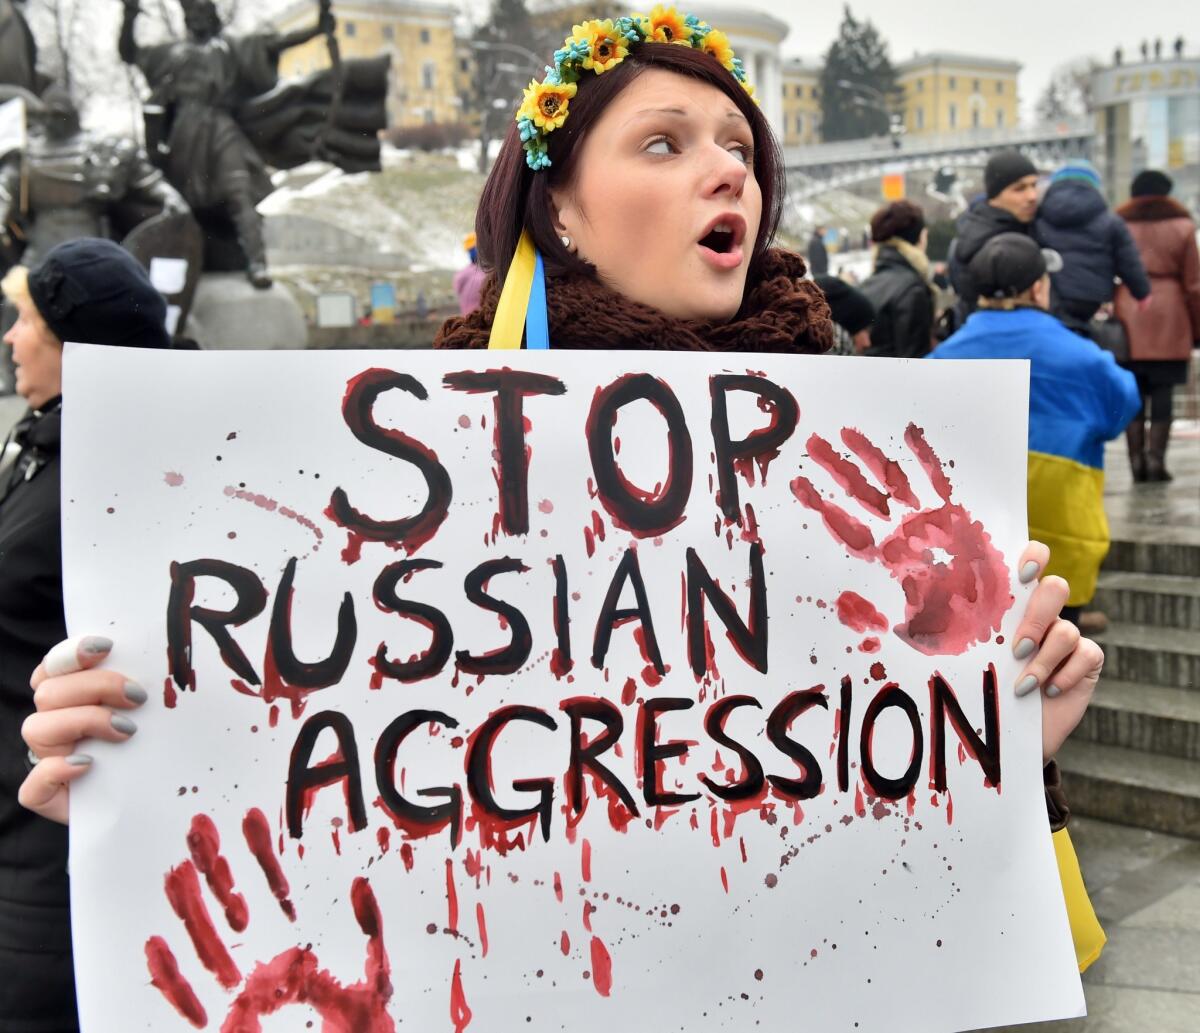 Demonstrators rally in Kiev after last weekend's shelling that left at least 30 people dead and more than 100 injured in the Ukrainian-controlled port of Mariupol.